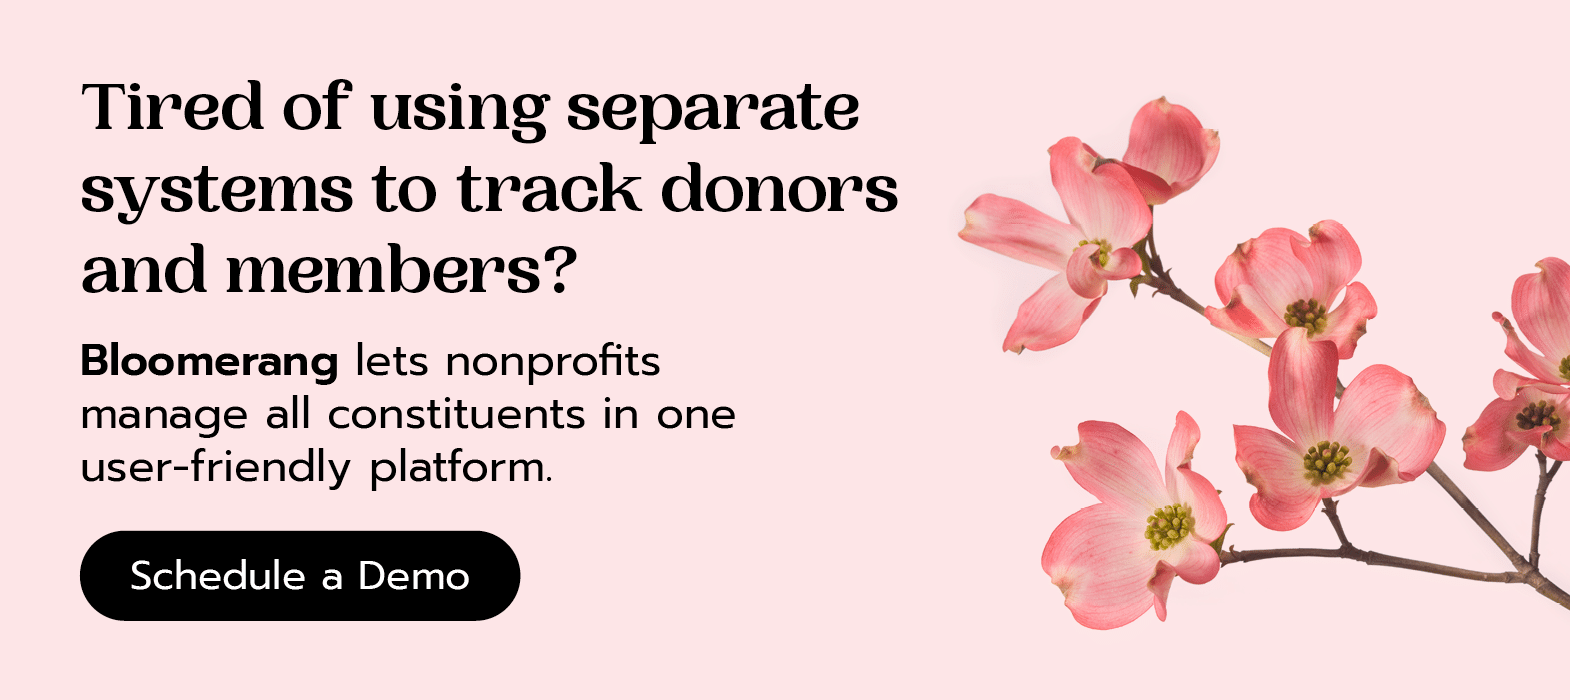 Tired of using separate systems to track donors and members? Bloomerang lets nonprofits manage all constituents in one user-friendly platform. Schedule a demo here. 